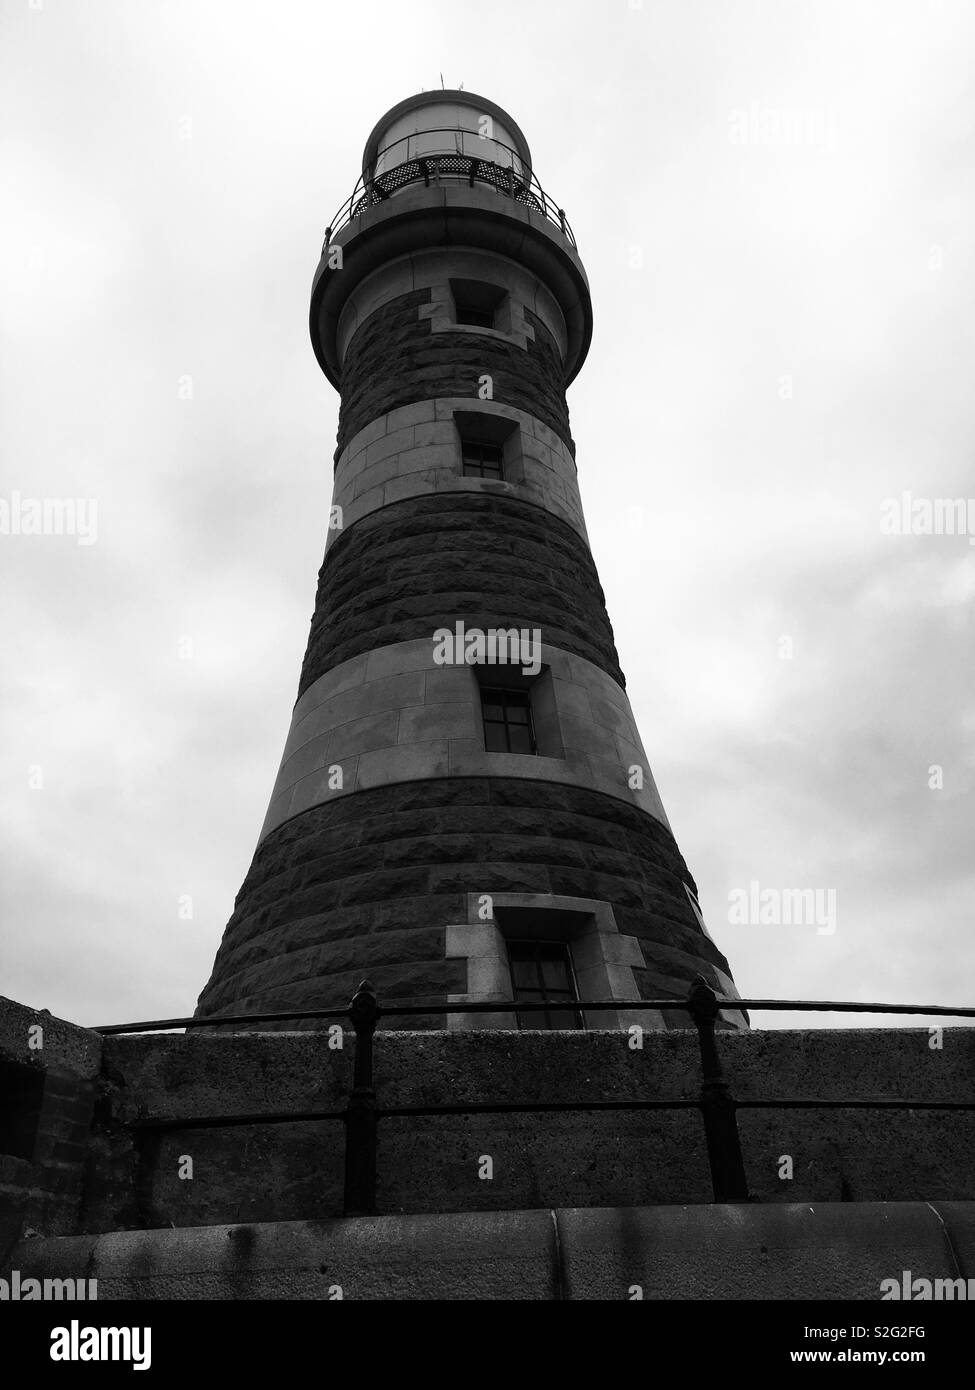 A light house on the pier at roker beach Stock Photo